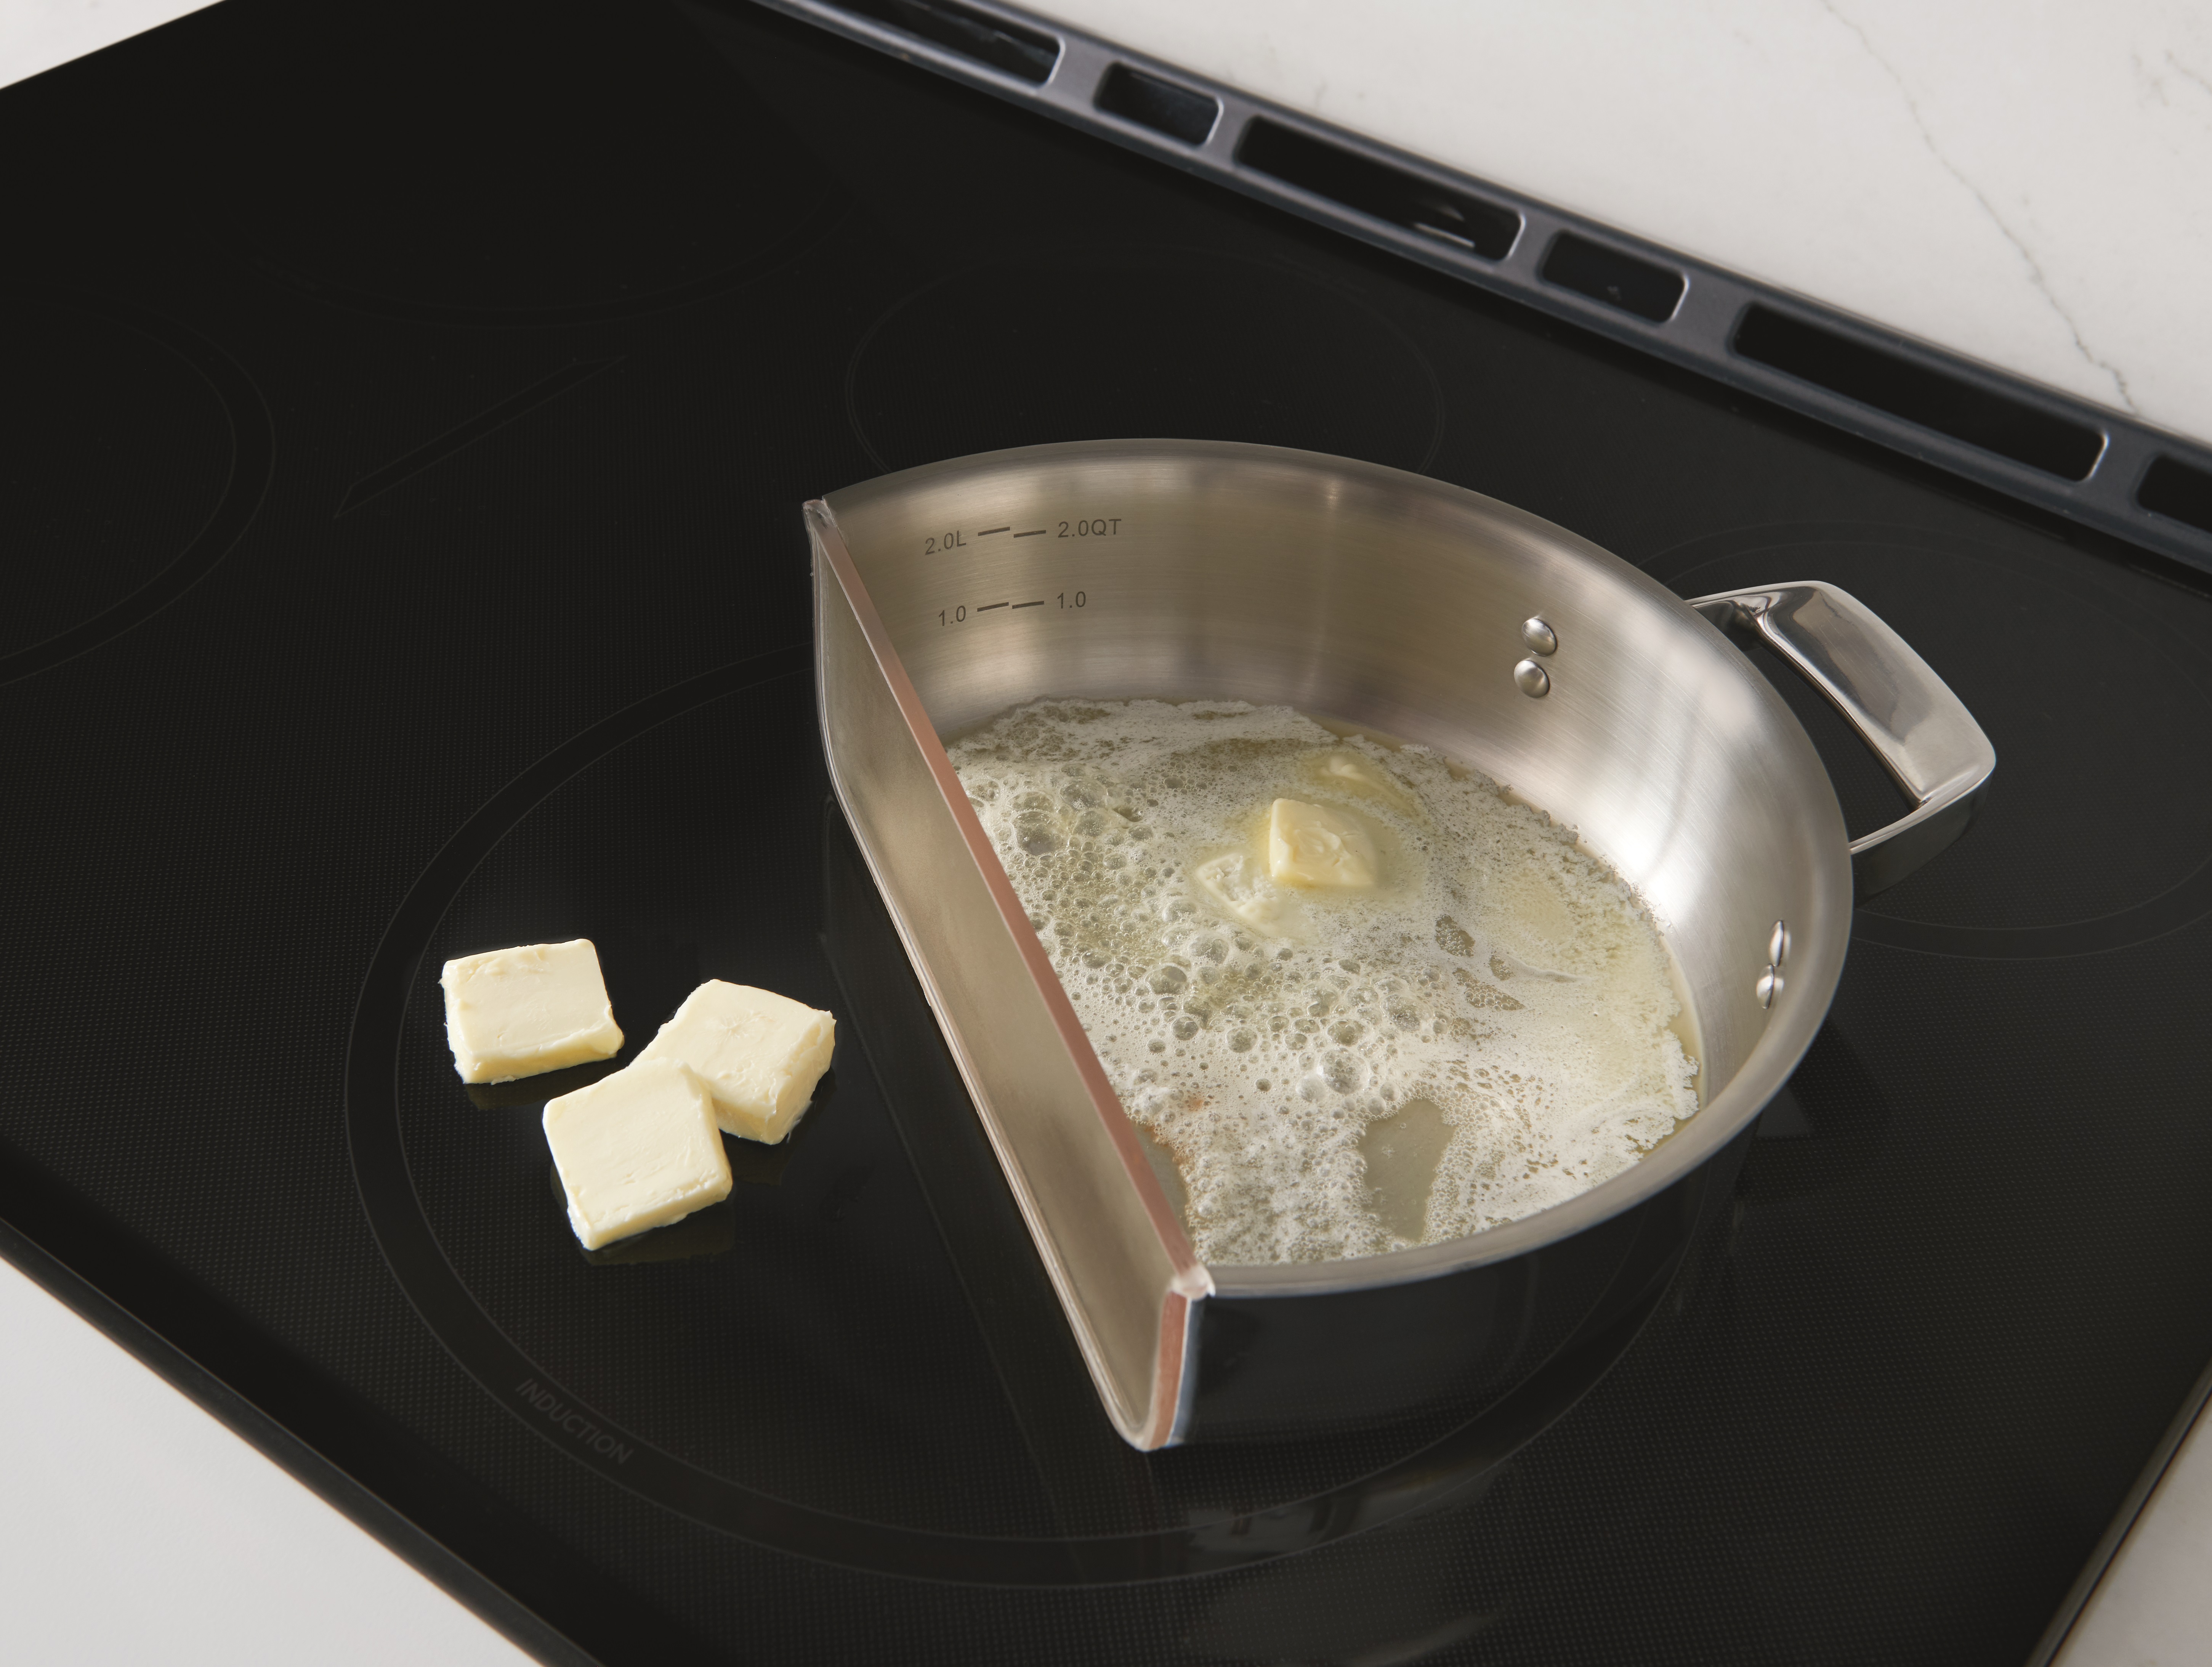 ge CHS950P4MW2 induction cooktop with bisected pan of melted butter next to unmelted butter